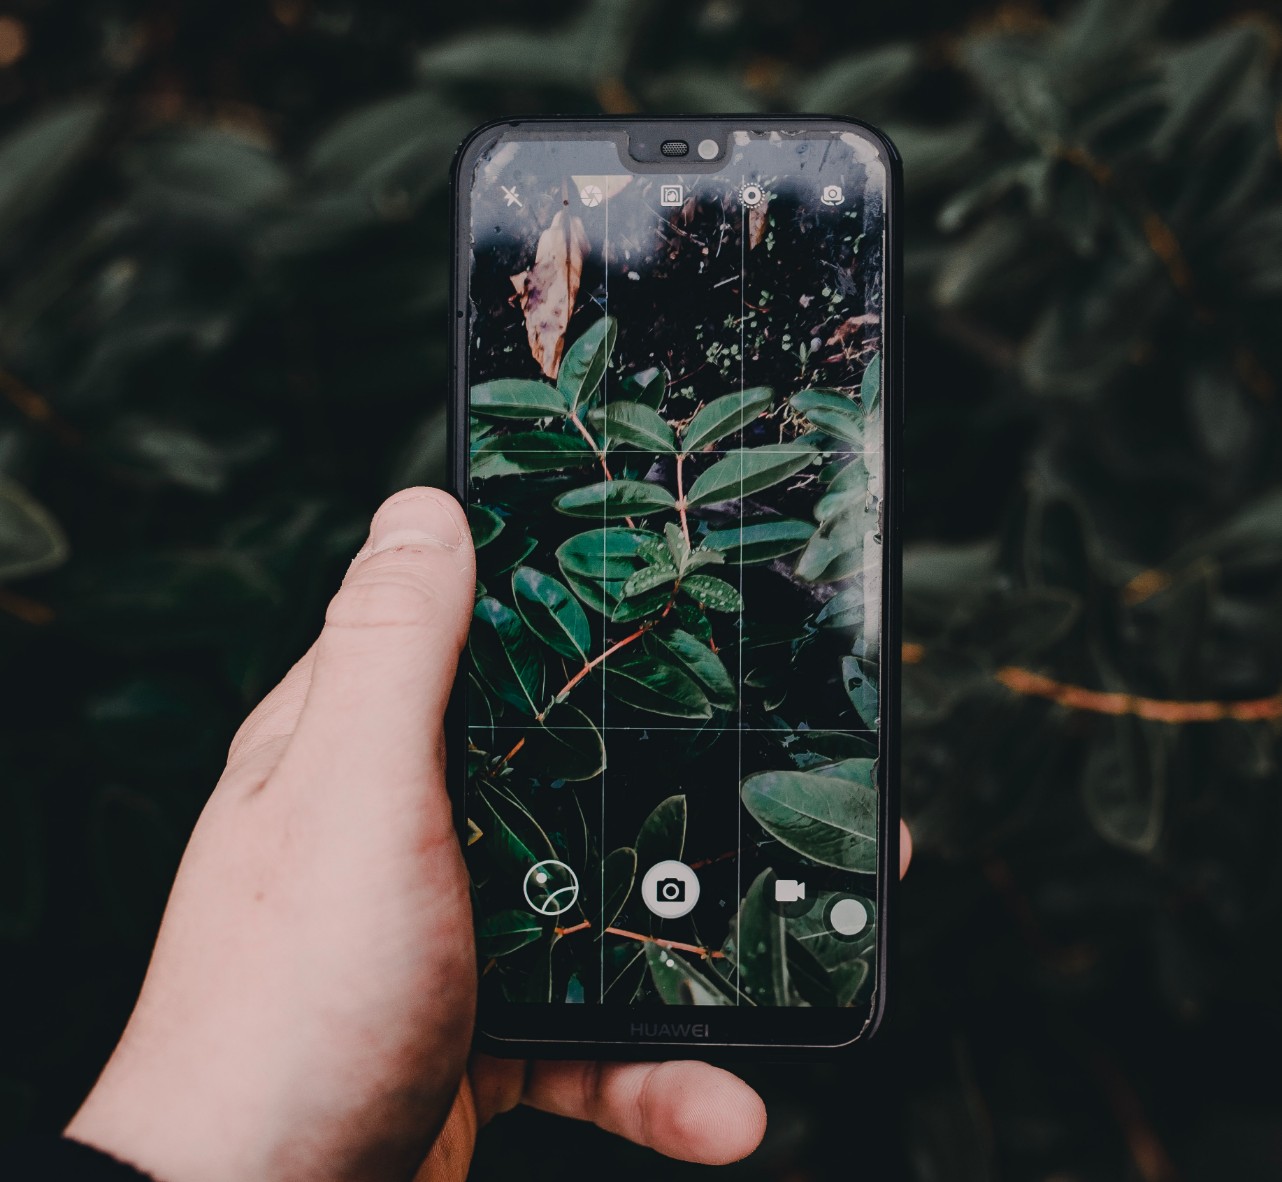 Phone screen with plant